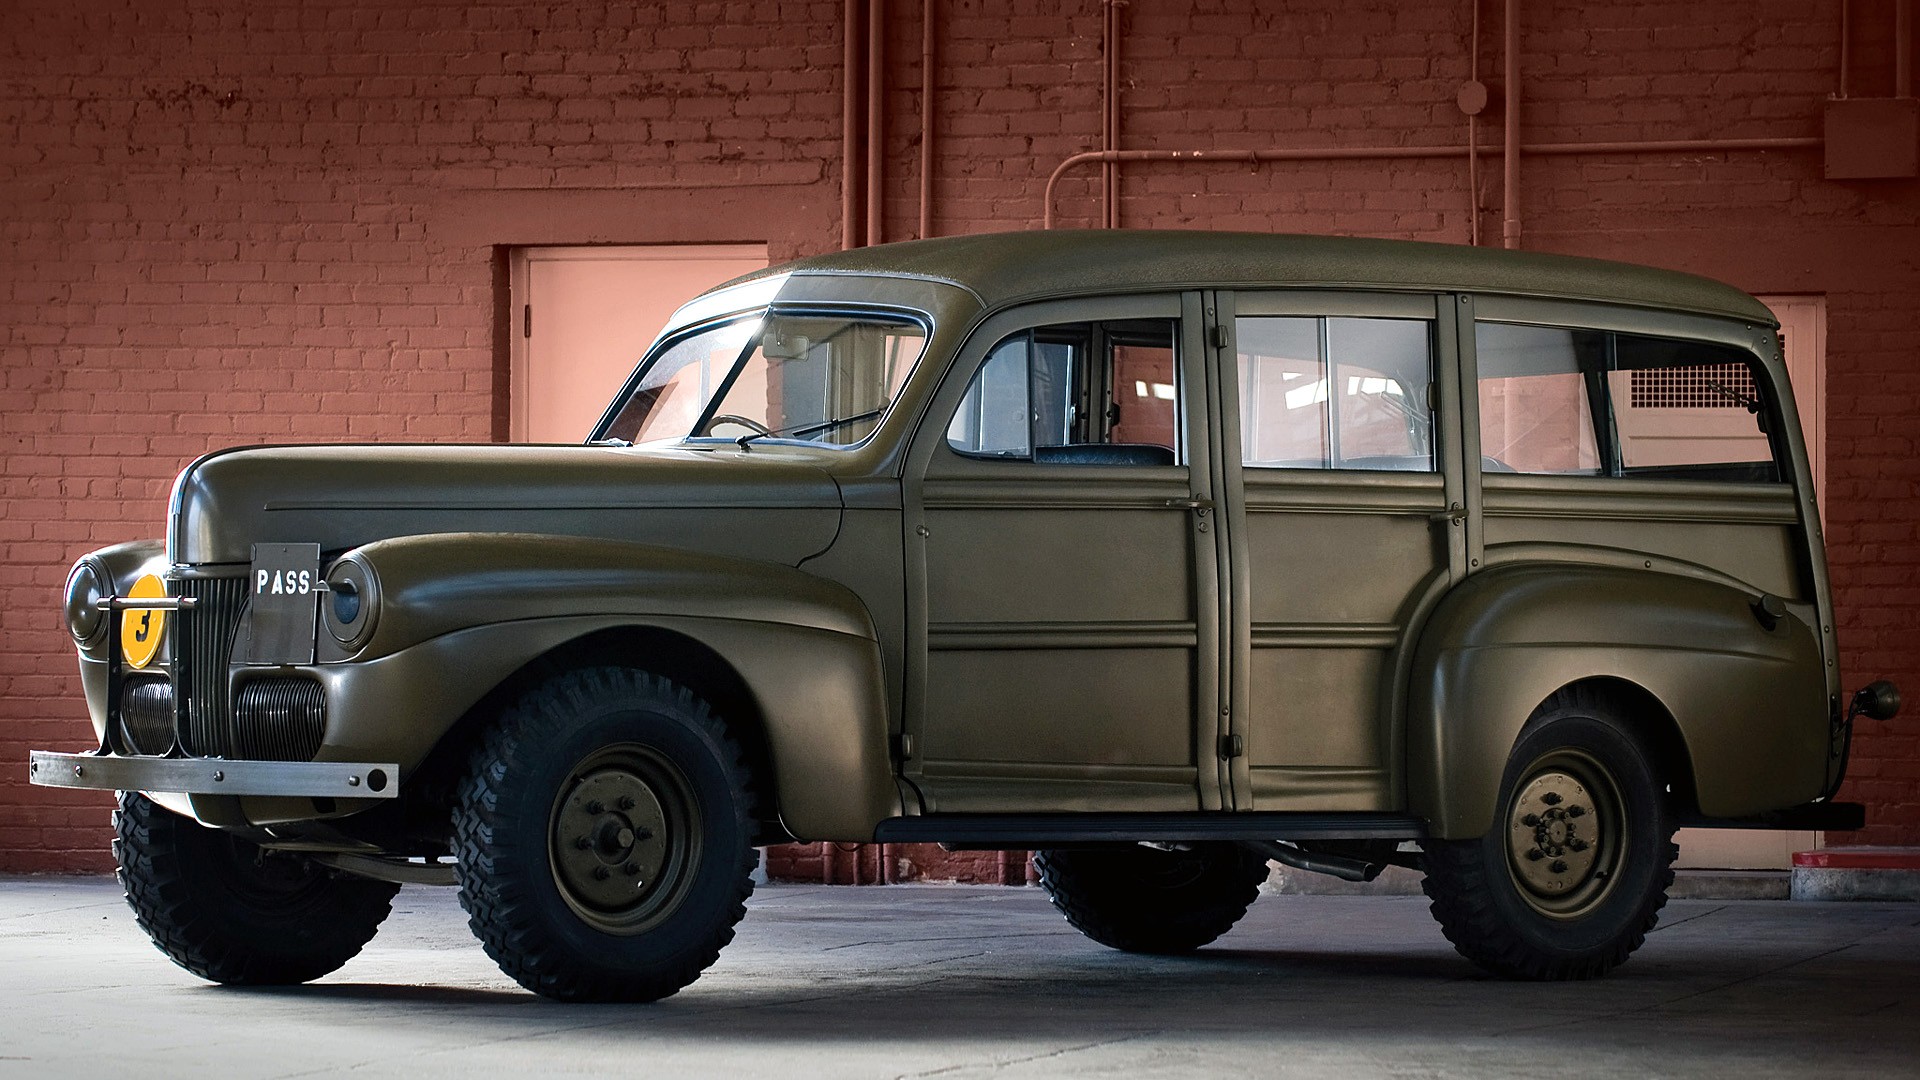 Military Vintage Cars Ford Classic Cars Wallpaper   MixHD wallpapers 1920x1080